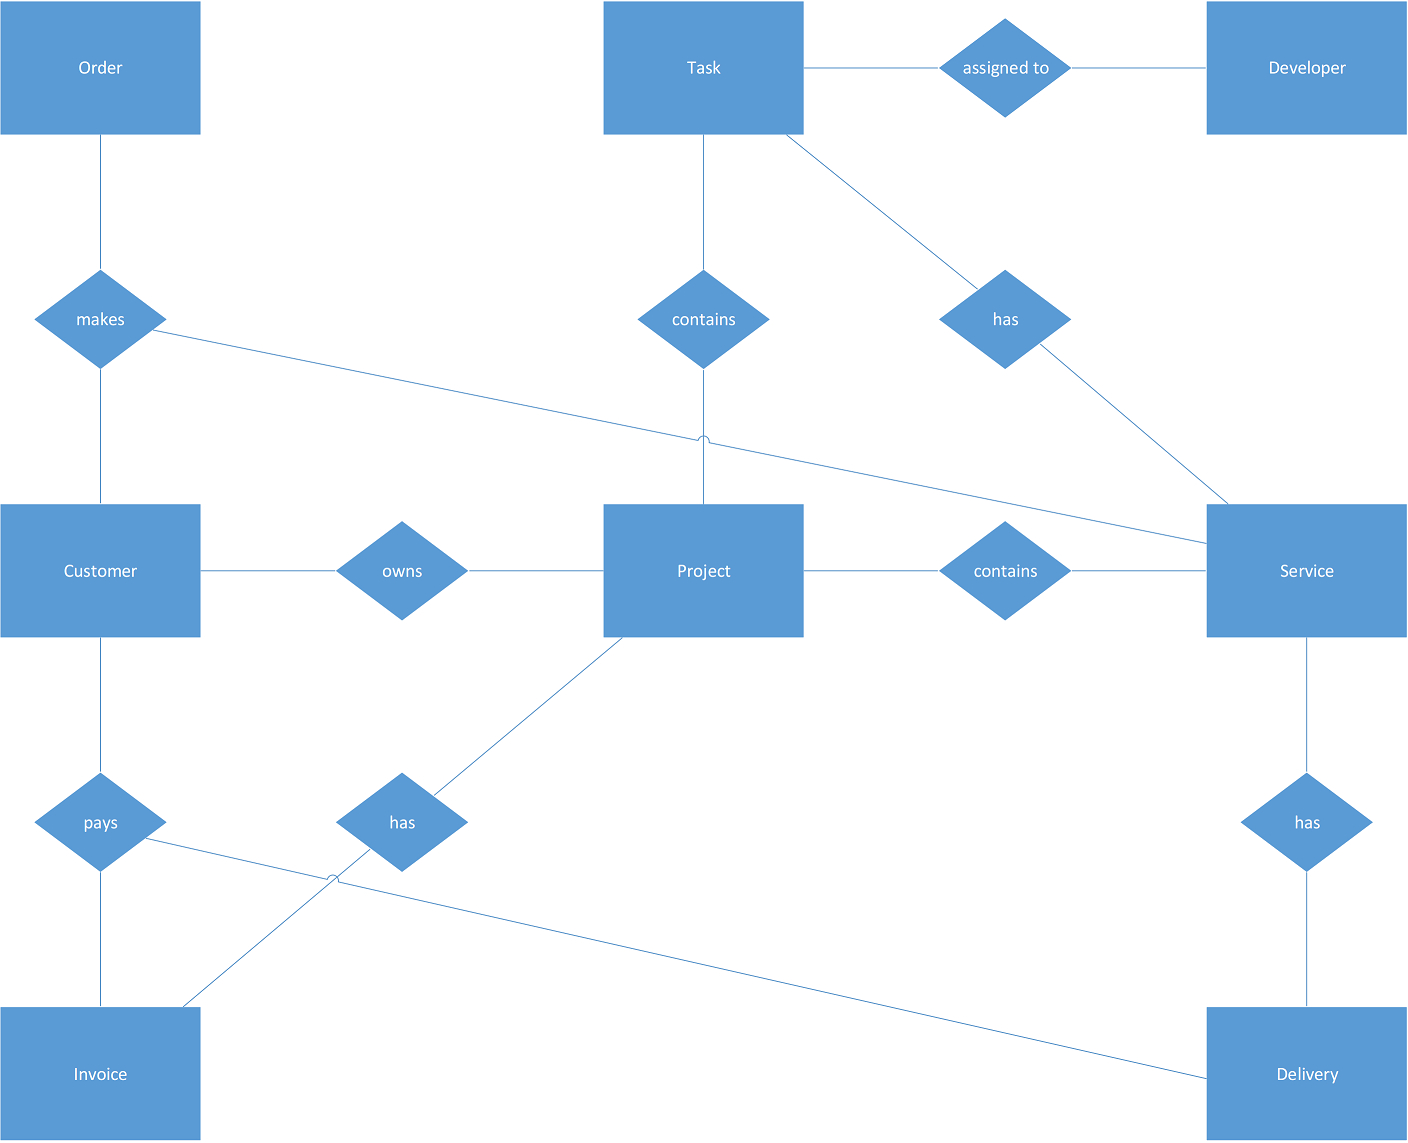 Erd For A Web Development Company - Database Administrators throughout Er Diagram For Company Database